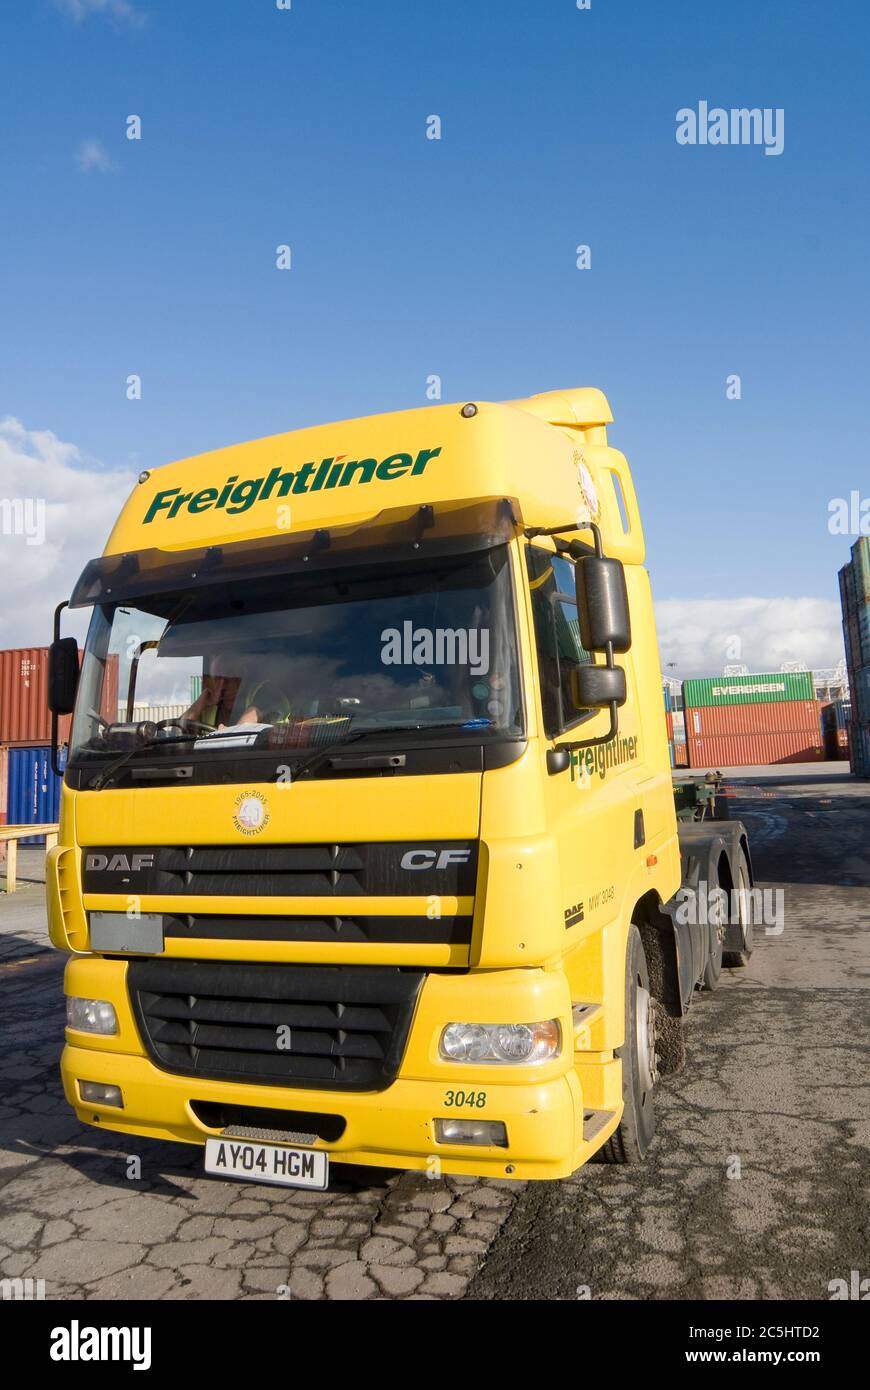 Freightliner lorry at Manchester Euroterminal, Trafford Park, Manchester, England. Stock Photo